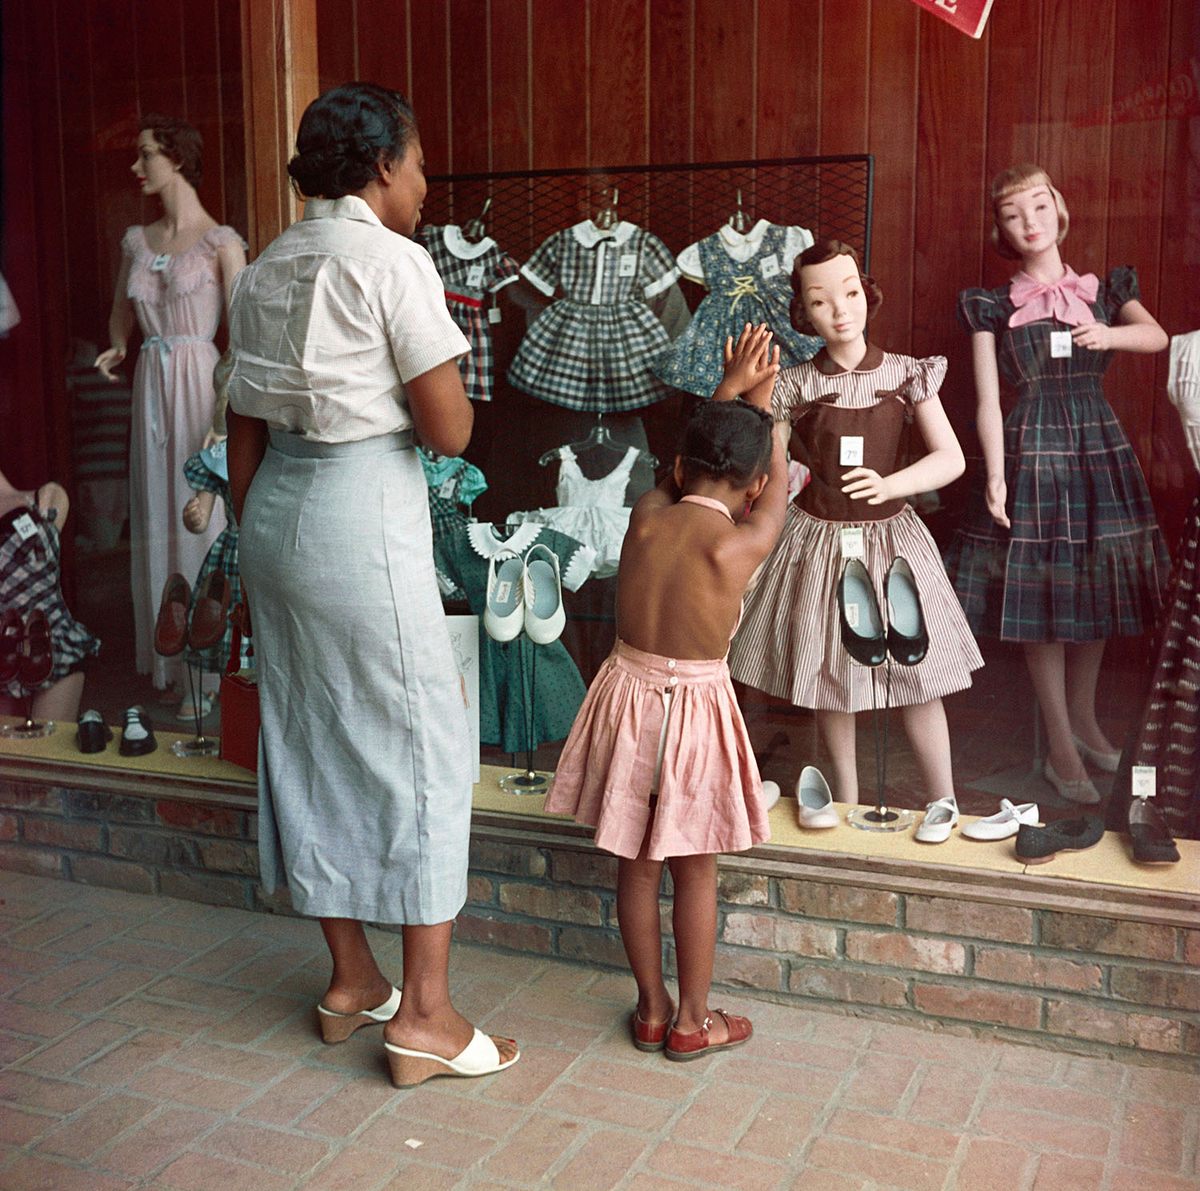 In the summer of 1956, <em>LIFE</em> magazine sent Parks to Mobile, Alabama, to photograph the everyday experiences of Black families in the segregated South. Over several weeks, Parks focused his lens on the Thorntons—Albert and his wife (whose name is not recorded), many of their nine children and 19 grandchildren, and even some of their great grandchildren. This image of young Ondria Tanner and her grandmother, Ondria Thornton, was one of 26 that appeared in the magazine that fall.
